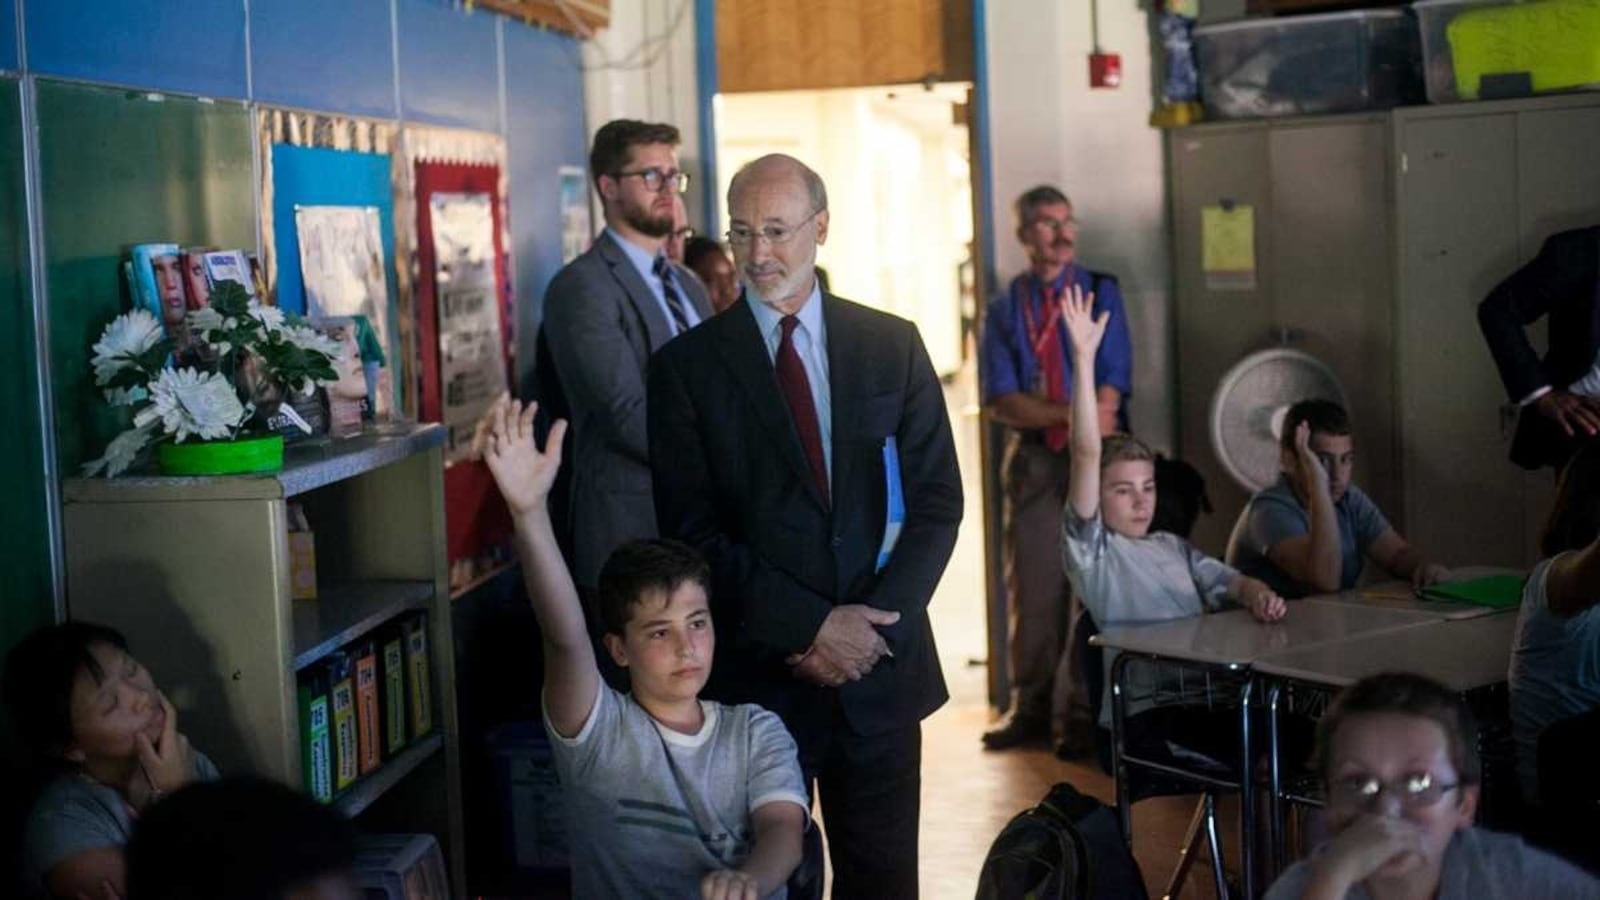 Governor Tom Wolf obvserves students during a visit to Baldi Middle School in Northeast Philadelphia.